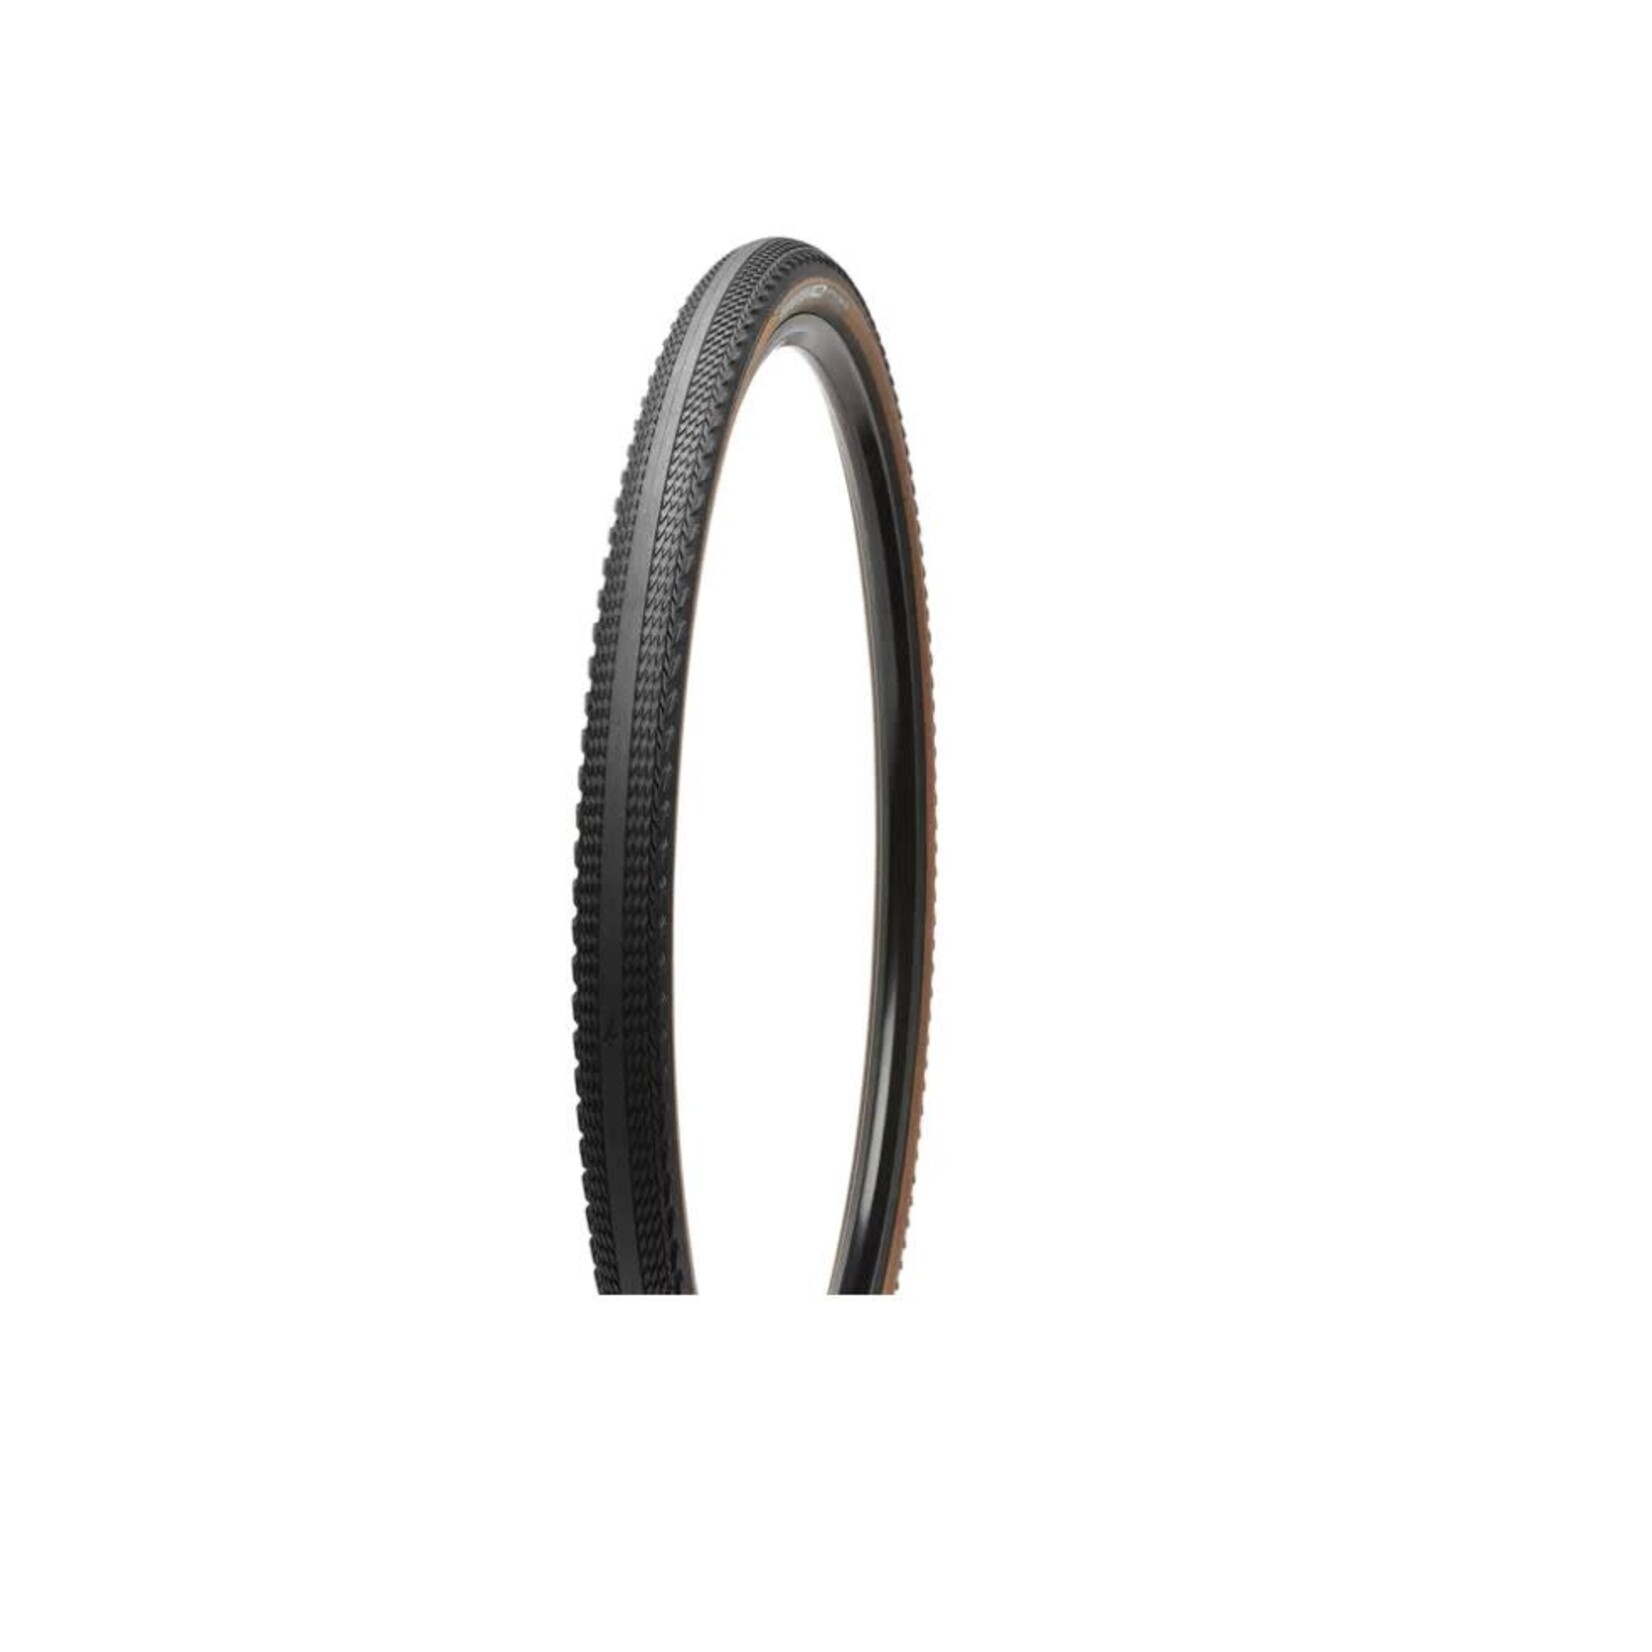 Specialized PATHFINDER PRO 2BR TIRE TANWALL 700 x 38c